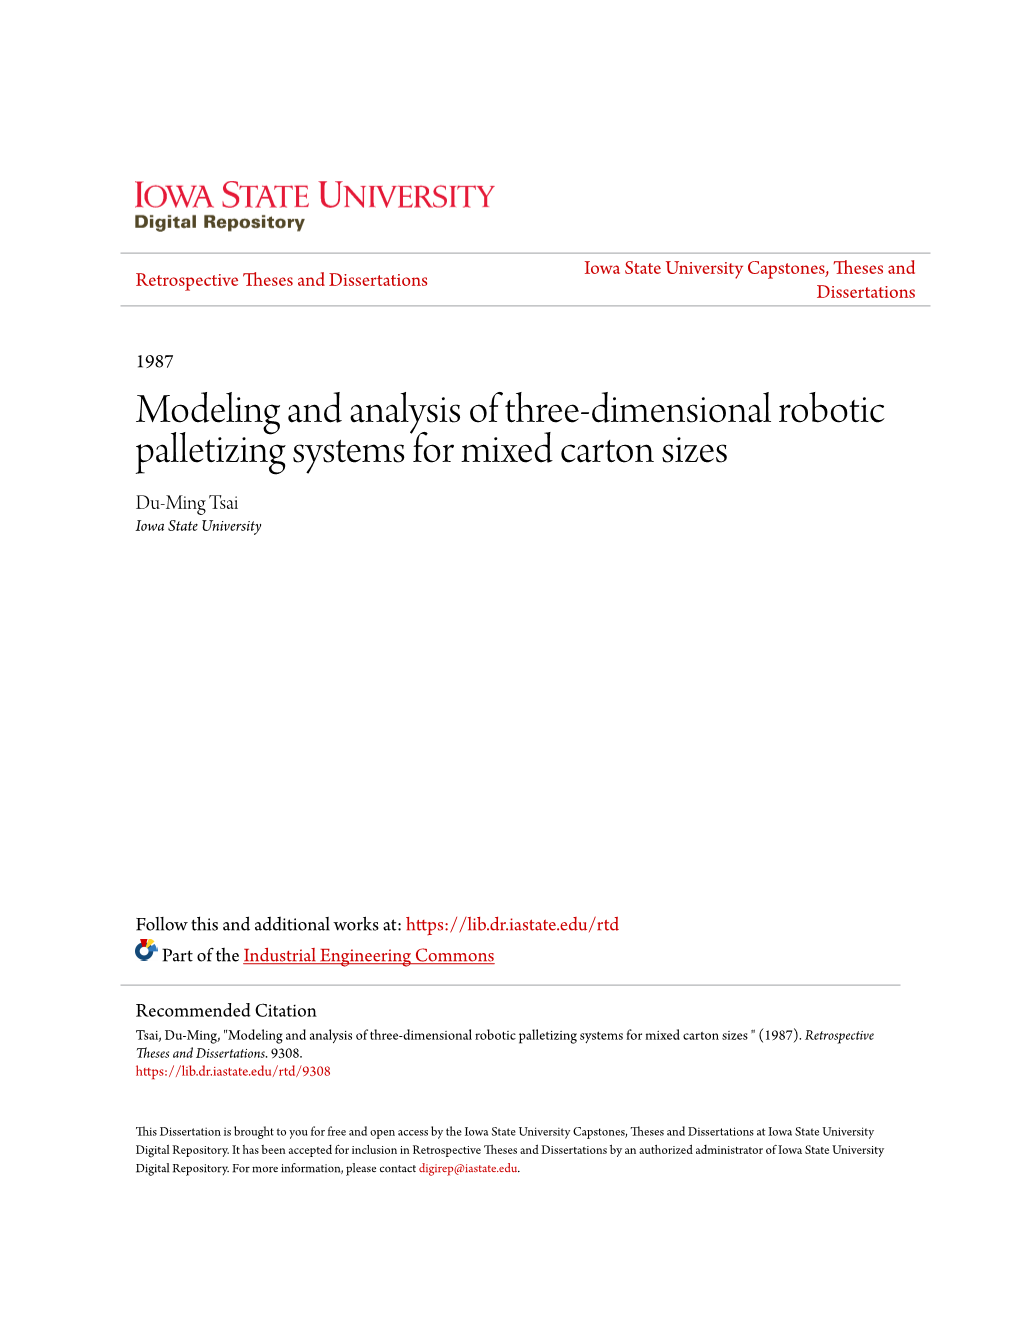 Modeling and Analysis of Three-Dimensional Robotic Palletizing Systems for Mixed Carton Sizes Du-Ming Tsai Iowa State University